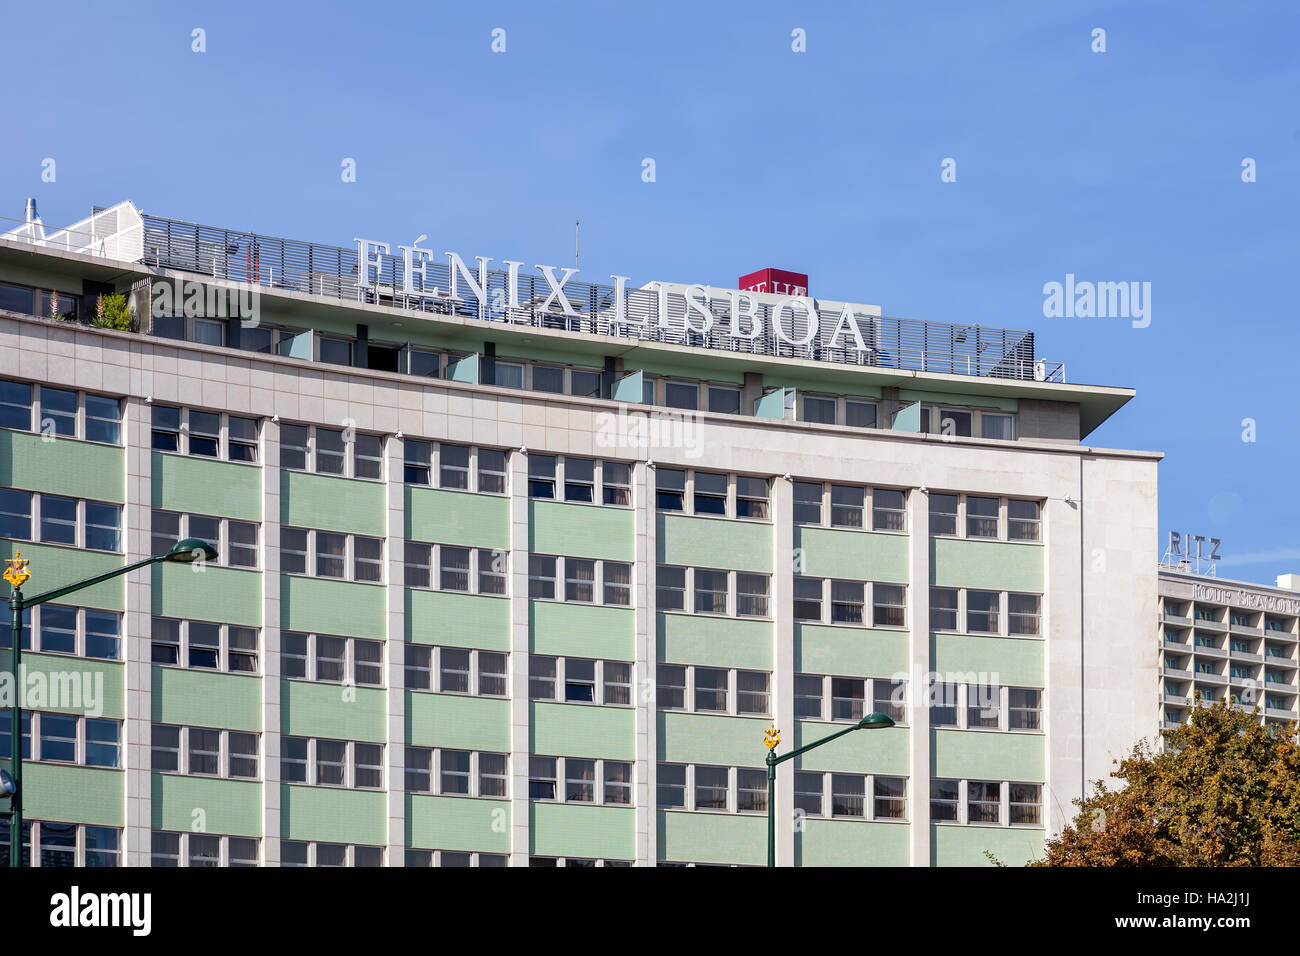 Lisbon, Portugal - October 19, 2016: The Lisbon Fenix Hotel. A four star hotel located in the Marques de Pombal Square. Stock Photo